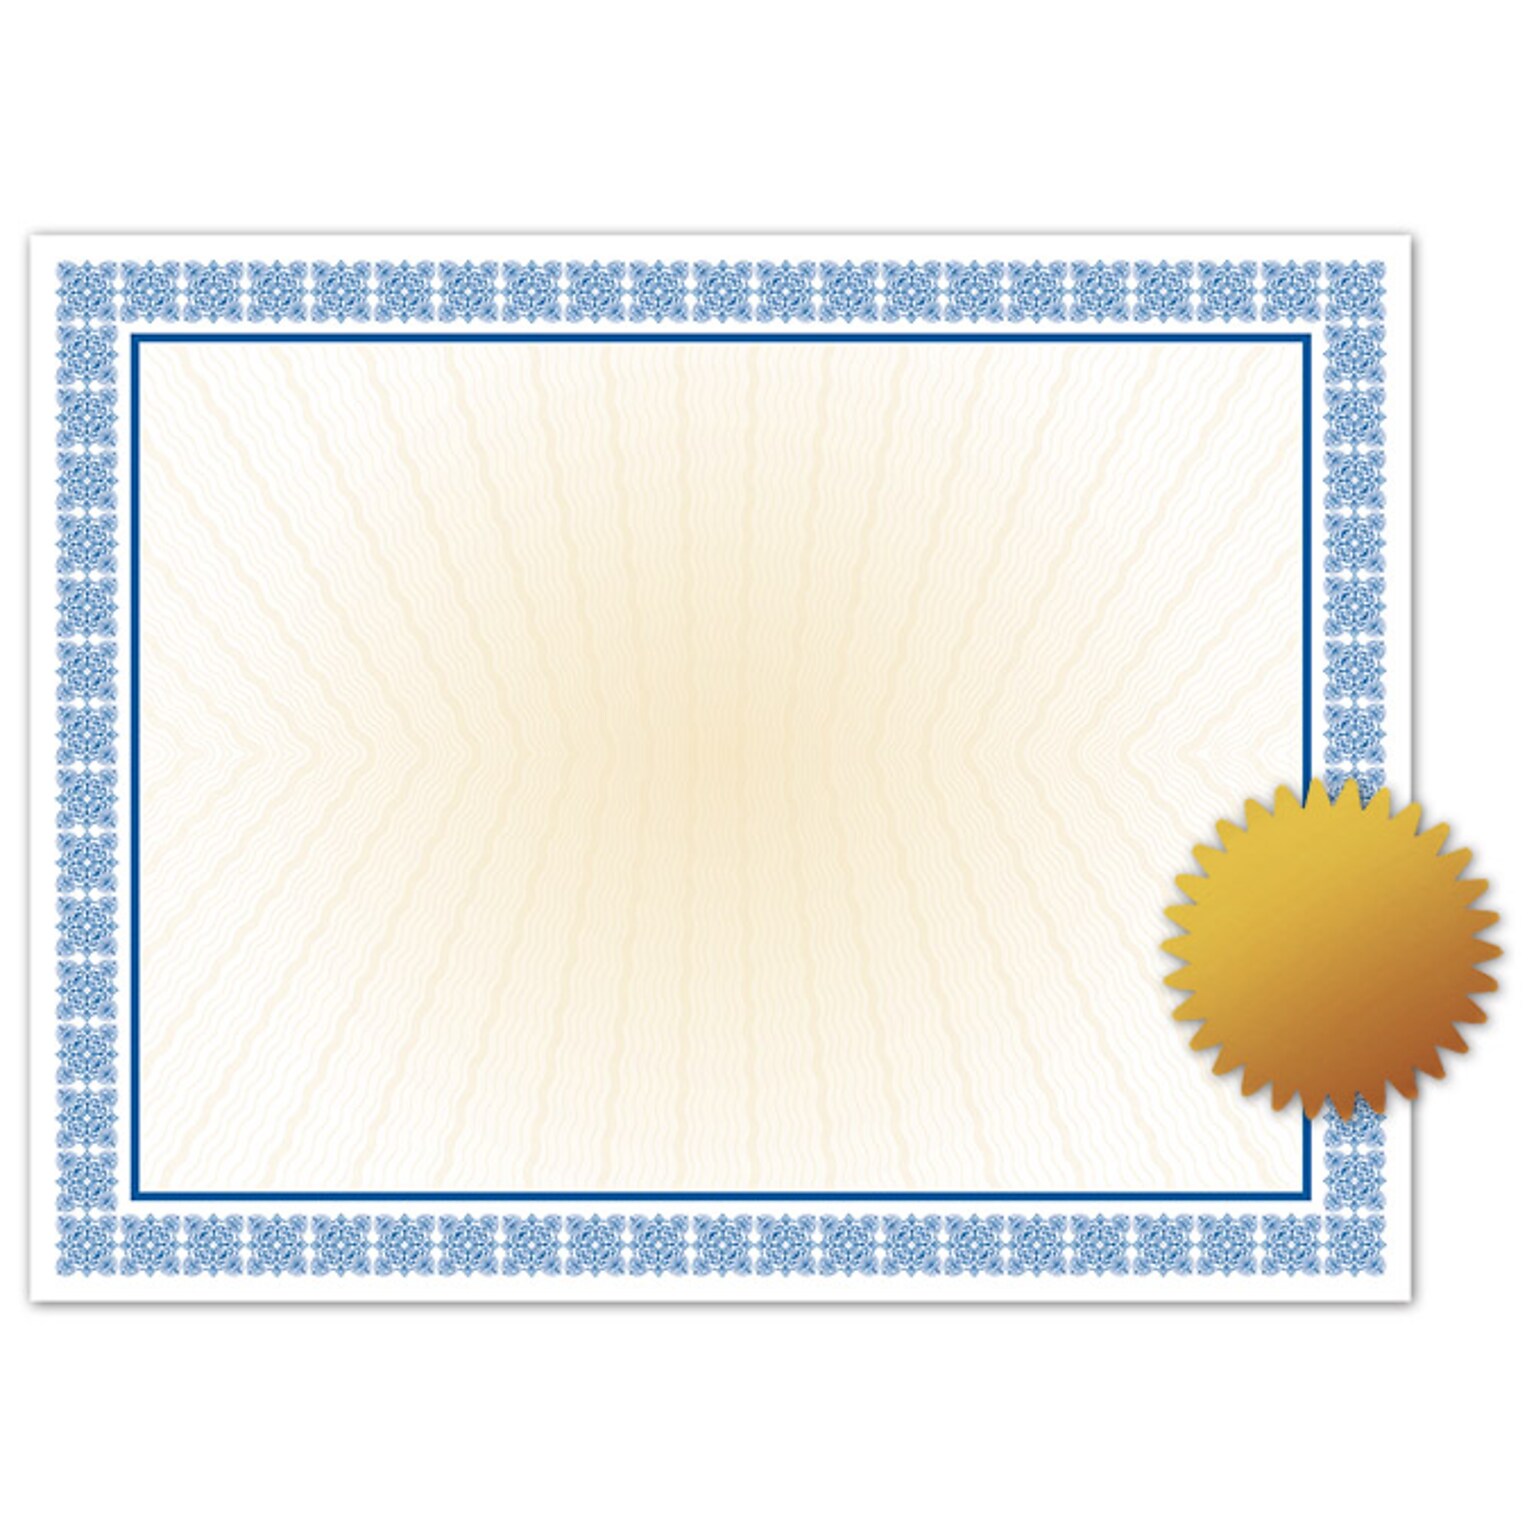 Great Papers Westminster Certificate Set, 8.5 x 11, White and Blue, 25/Pack (2015076)